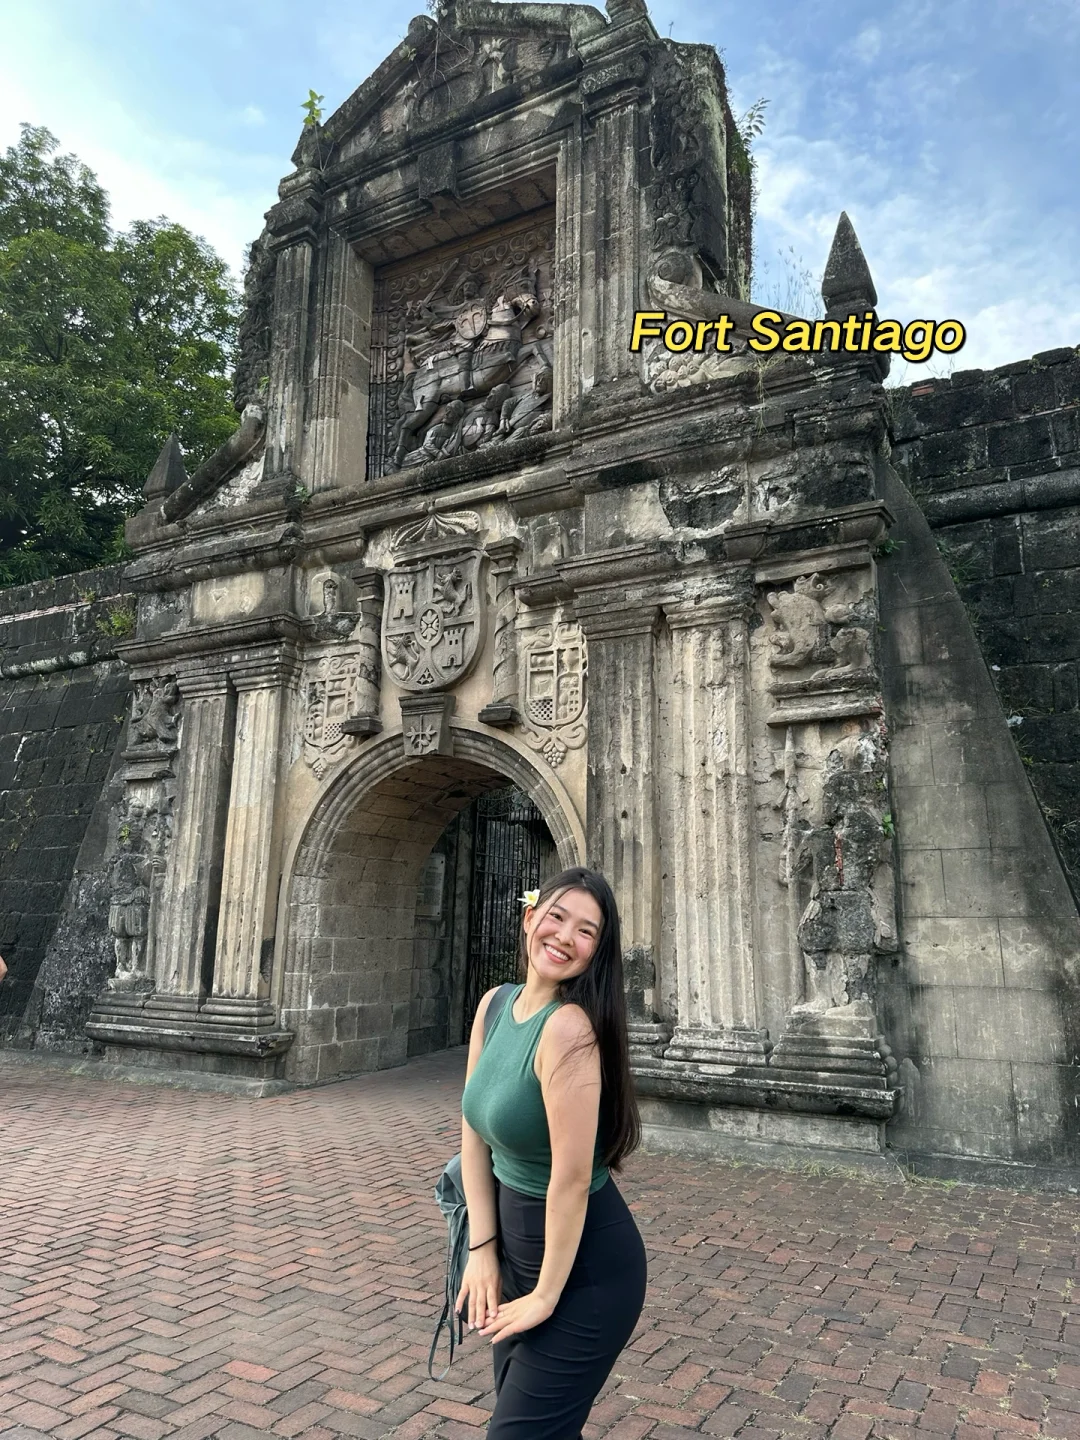 Manila/Luzon-Intramuros, the old town of Manila, a beautiful and dangerous place